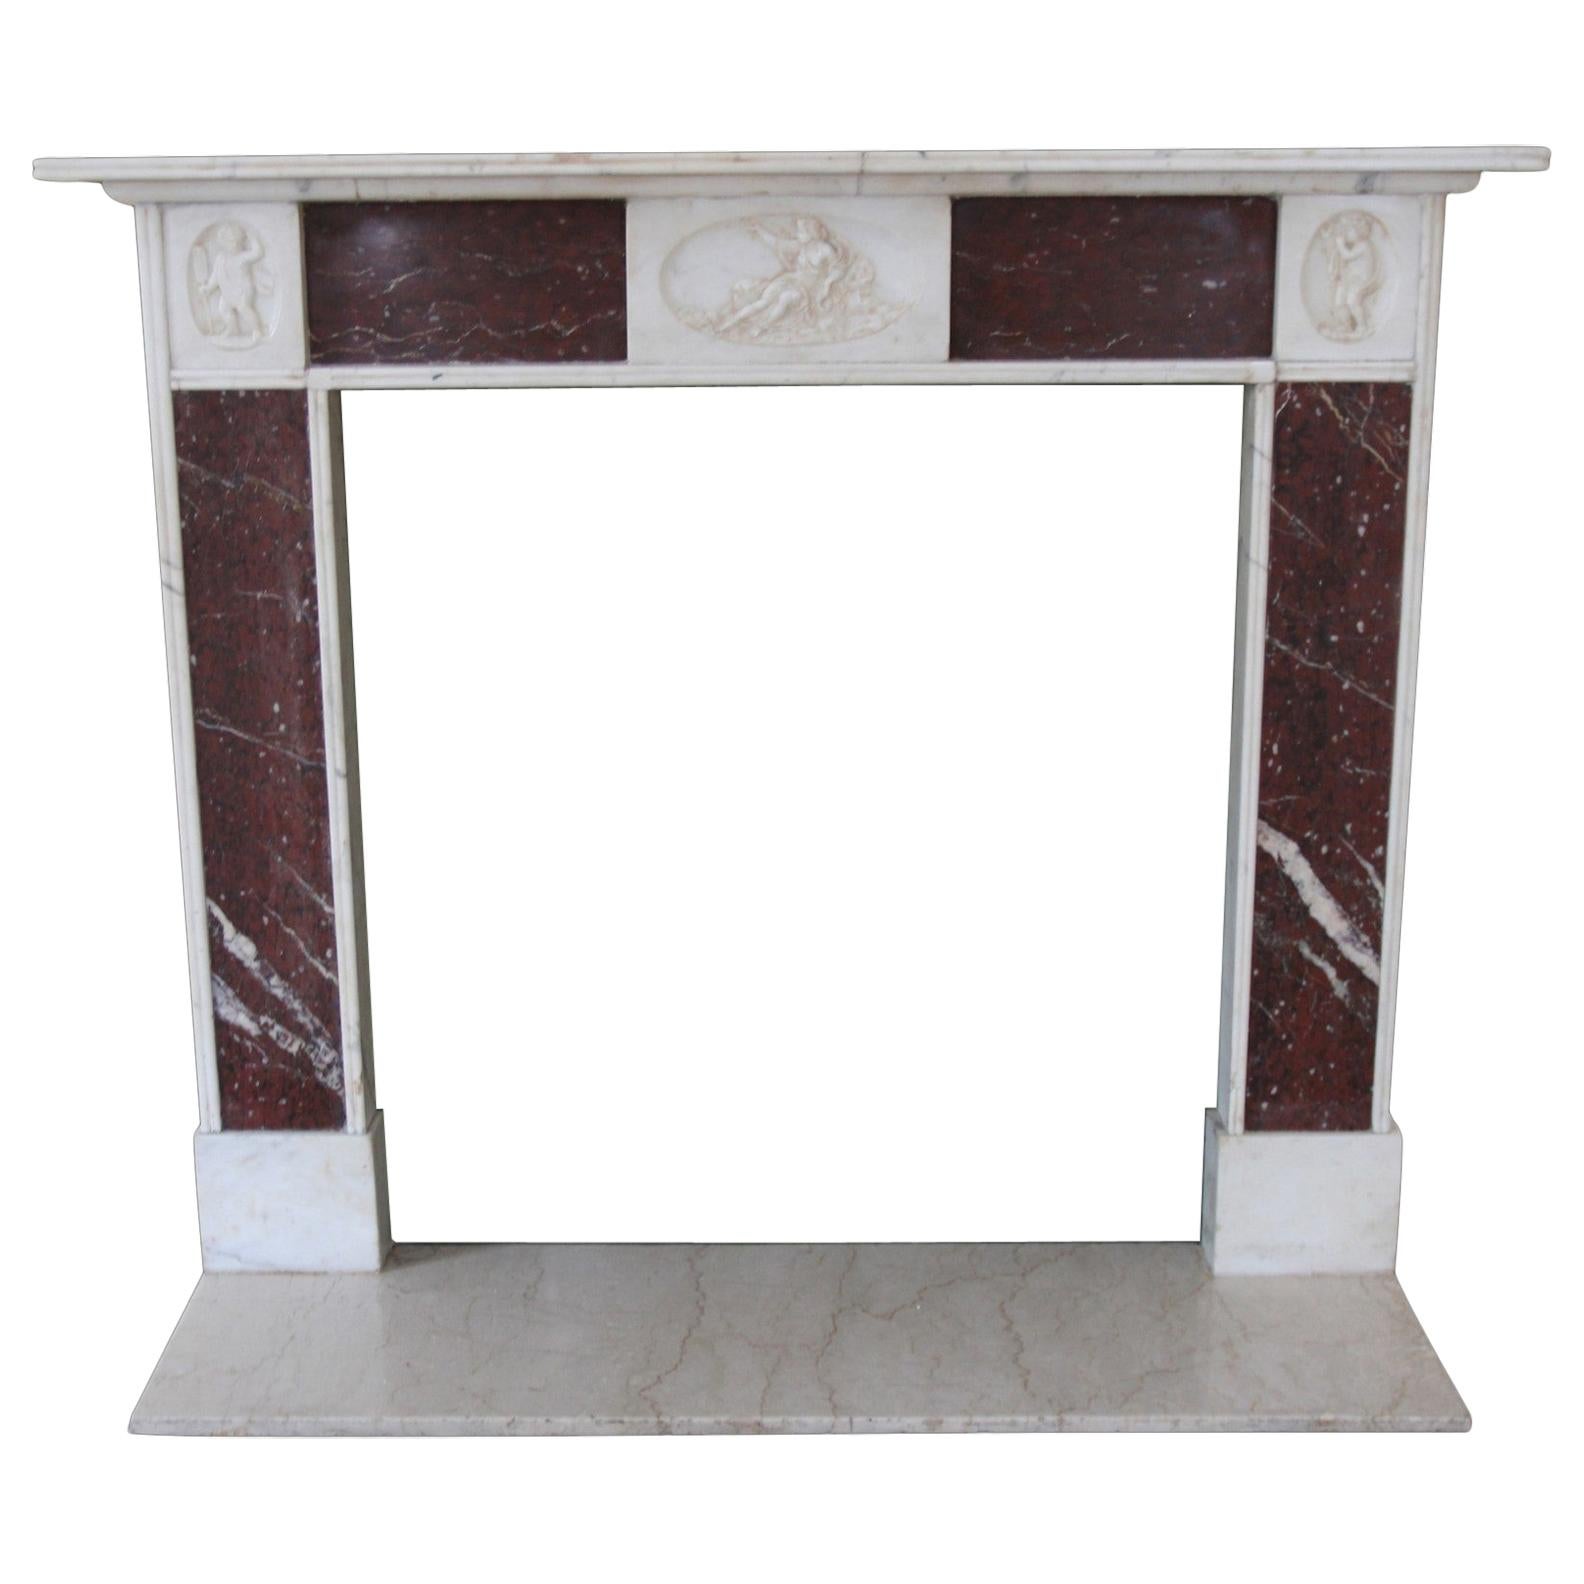 NYC Waldorf Astoria Hotel Marble Mantel English Regency Style For Sale